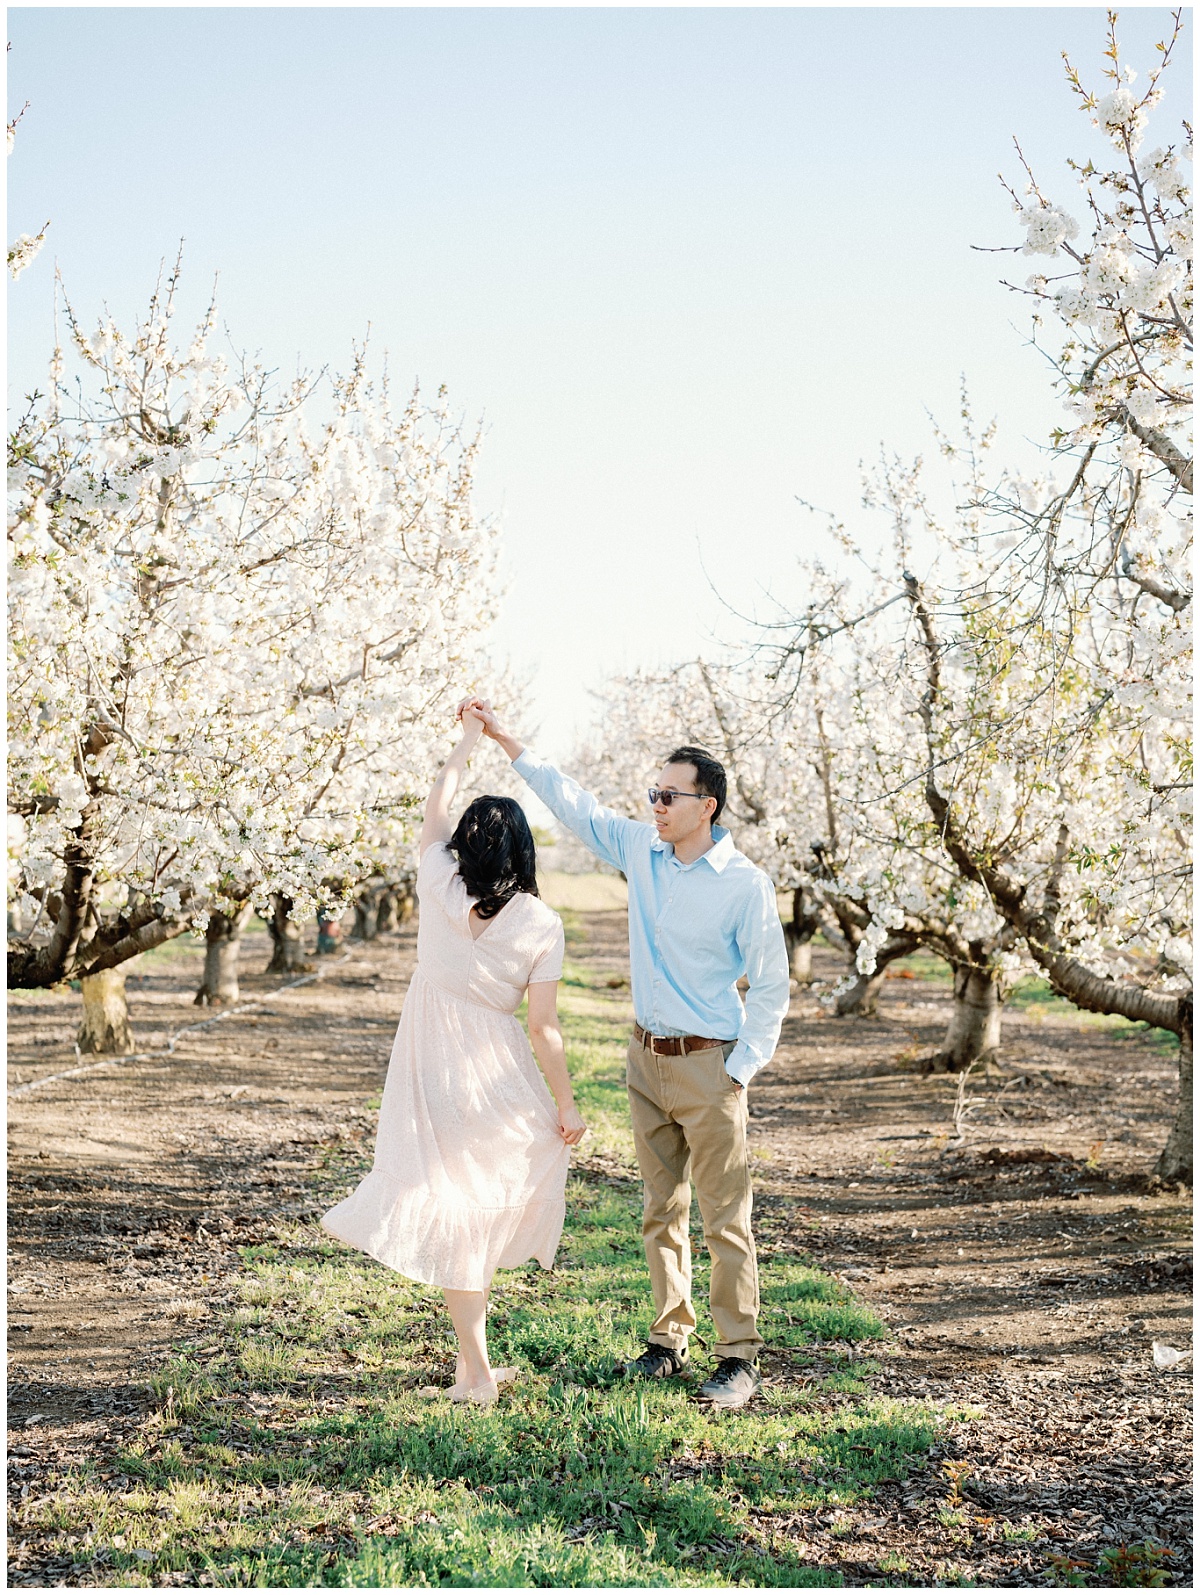 Engagement Photos at the Cherry Blossom Orchard